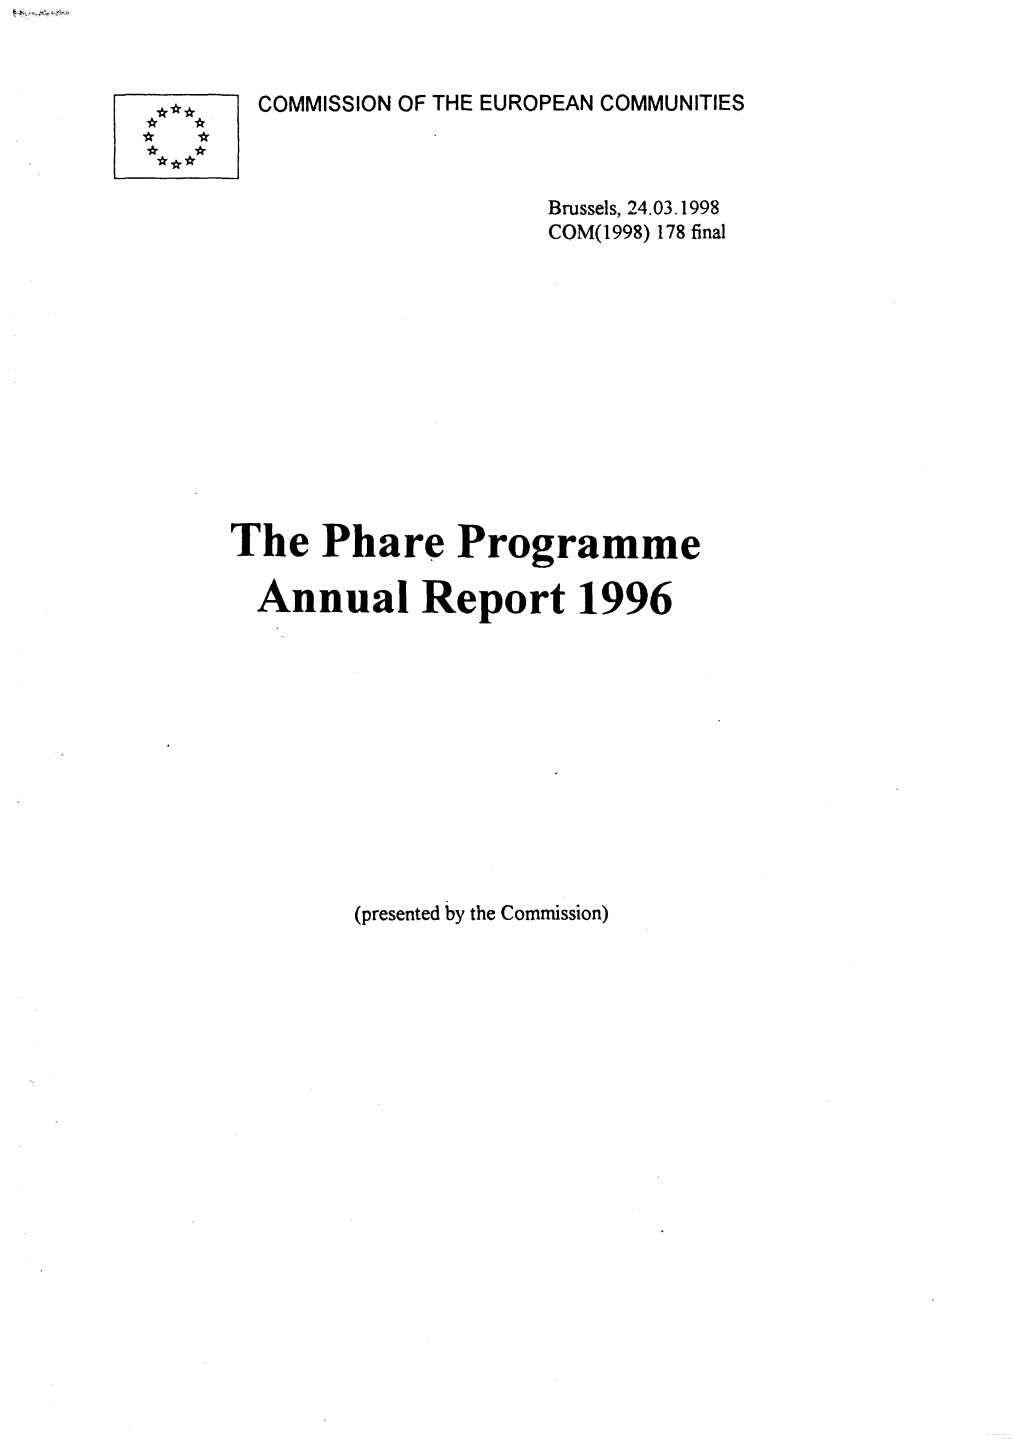 The Phare Programme Annual Report 1996